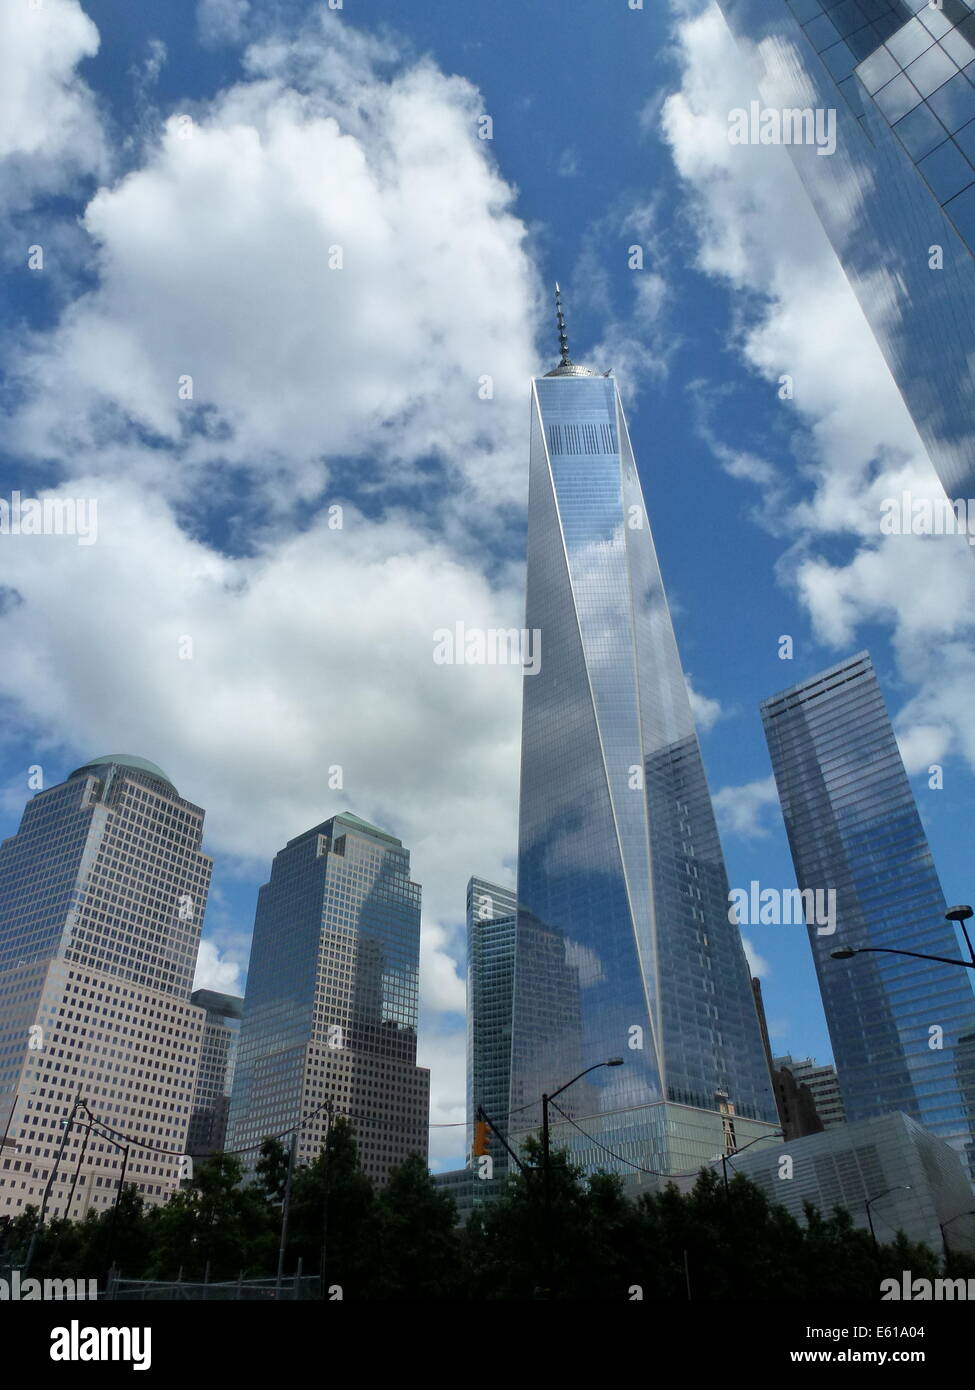 Clouds mirror on the facade of One World Trade Center (WTC 1) office highrise, previously known as the Freedom Tower, situated adjacent to the World Financial Center (WFC) (L) in New York City, USA, 20 August 2014. The WTC 1 skyscraper was constructed on the site also known as Ground Zero, which saw the destruction of the World Trade Center in the terrorist attack on 11 September 2001. The building which has been under construction since 2006 is the tallest highrise in the United States, measuring 541.3 metres. Photo: Alexandra Schuler/dpa - NO WIRES SERVICE - Stock Photo